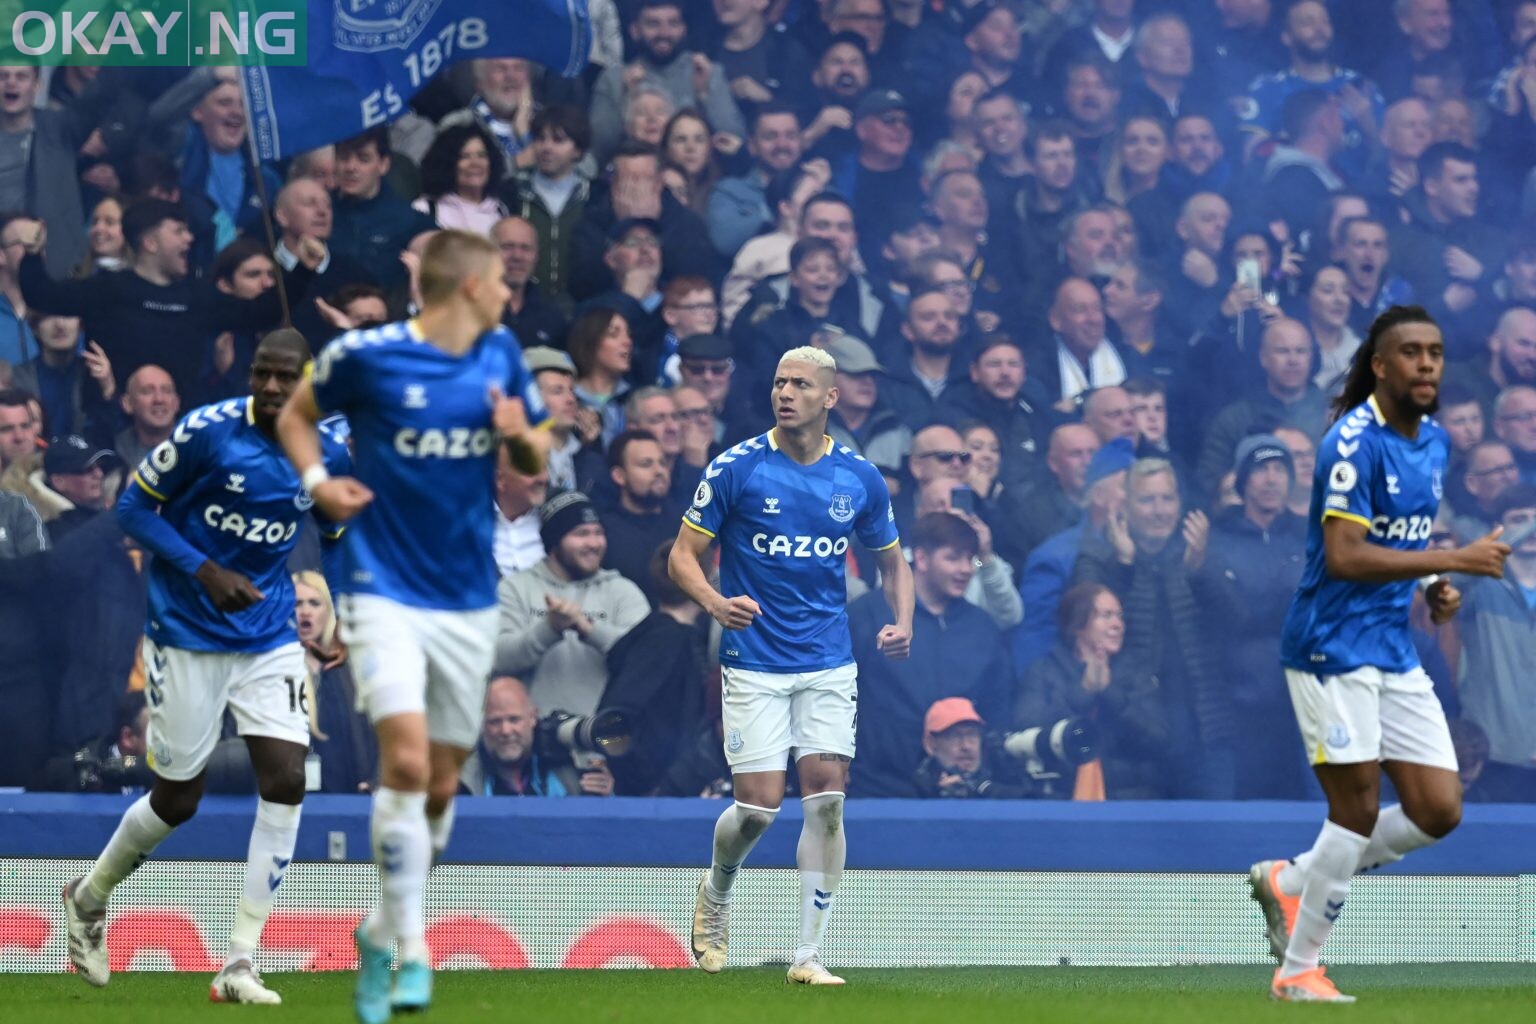 Everton’s Brazilian striker Richarlison (C) celebrates with teammates after scoring the opening goal of the English Premier League football match between Everton and Chelsea at Goodison Park in Liverpool, north west England on May 1, 2022. (Photo by Paul ELLIS / AFP)